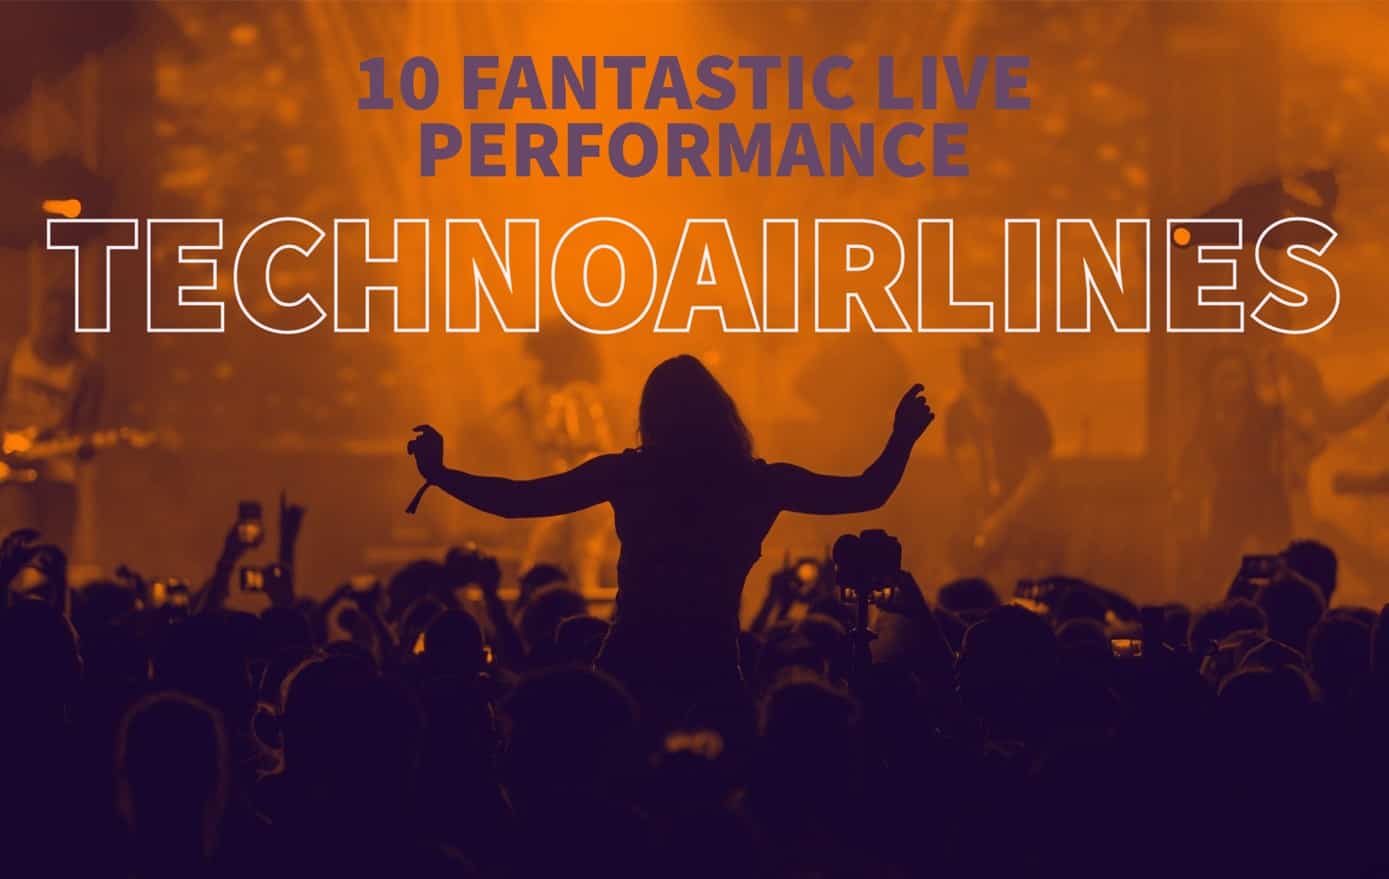 Disembarrassing 10 Fantastic Live Performances to Relieve